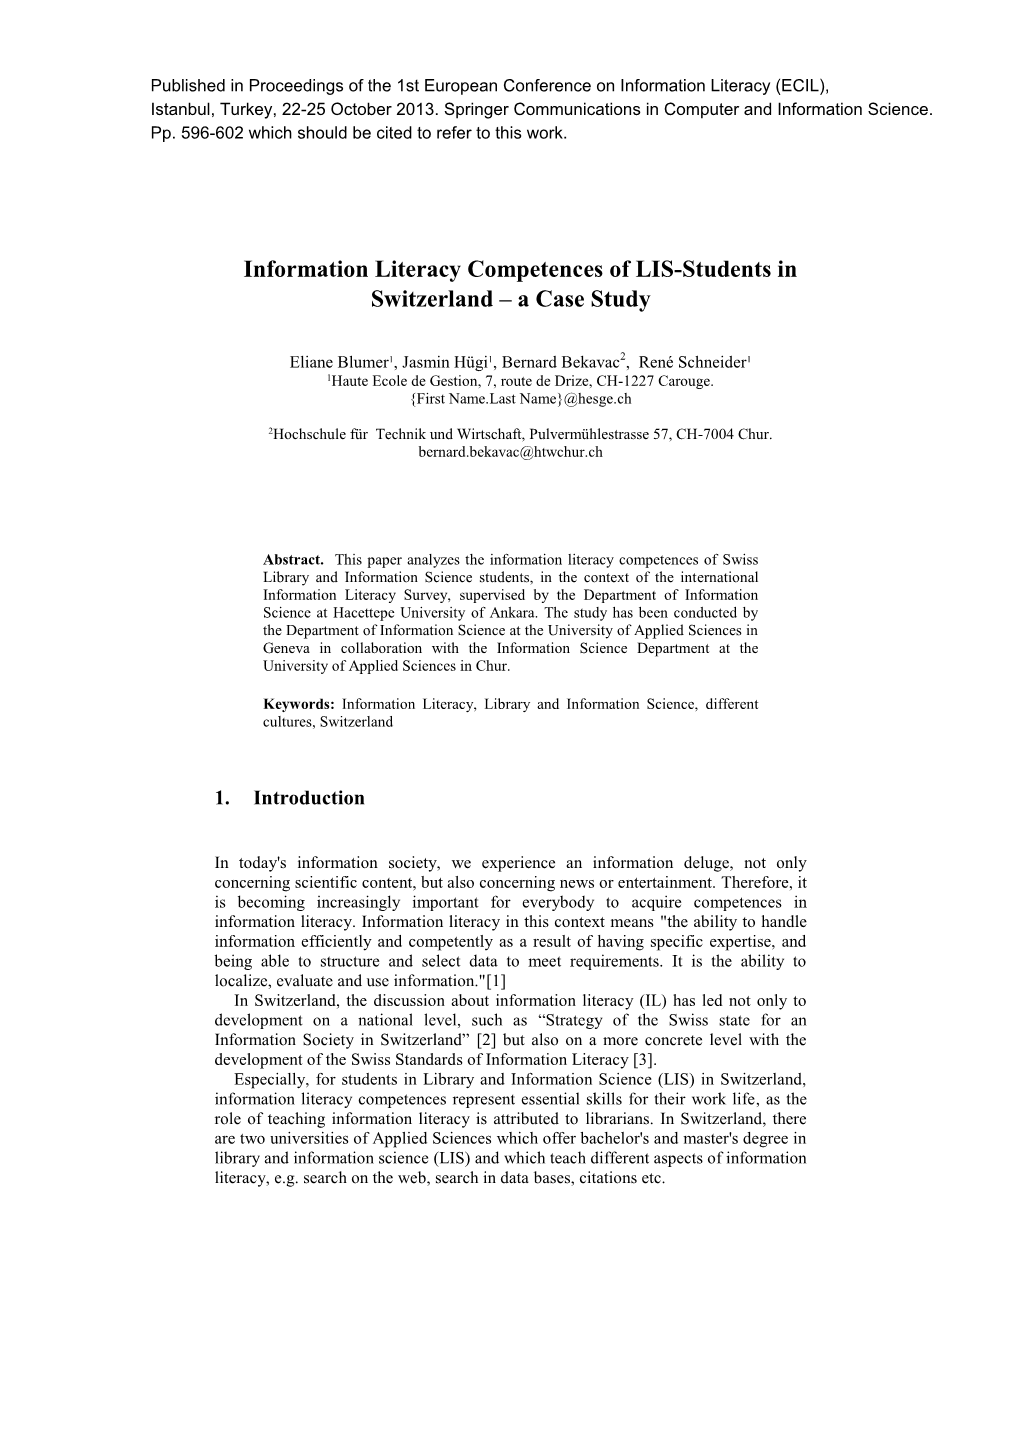 Information Literacy Competences of LIS-Students in Switzerland – a Case Study